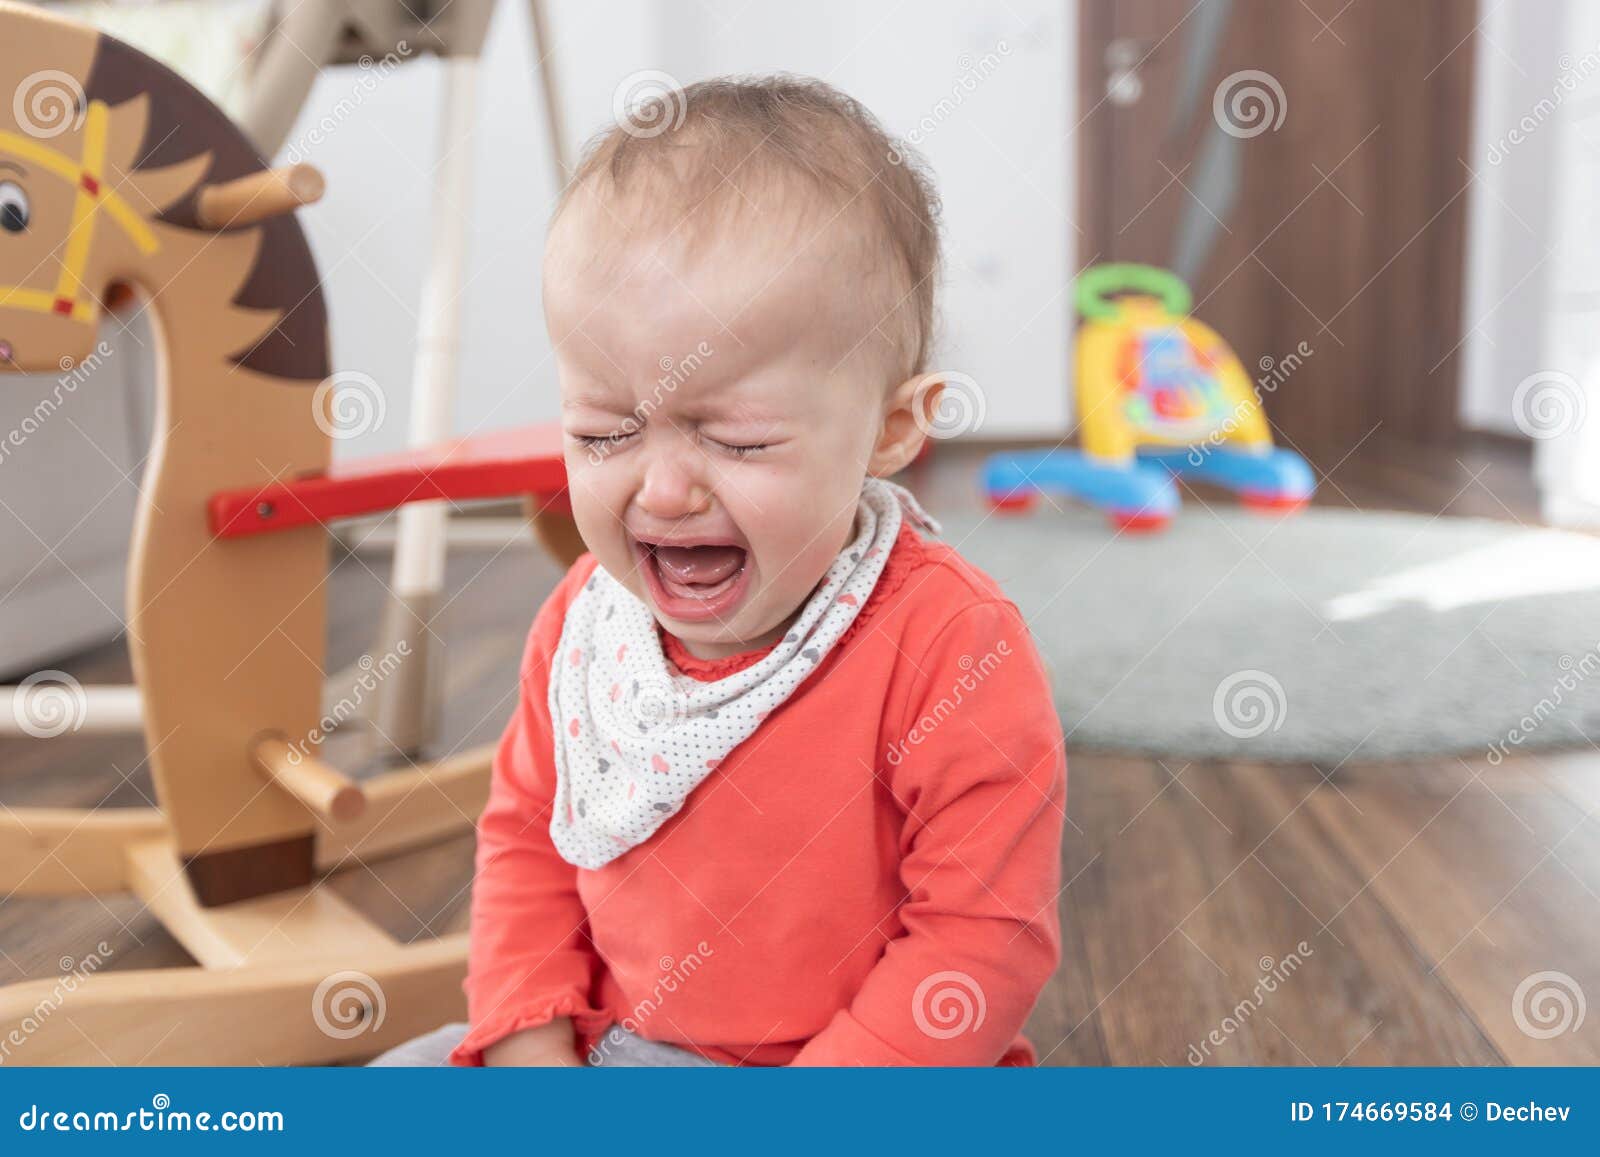 Girl Sitting on the Floor at Home and Crying. One Year Old Baby Crying ...